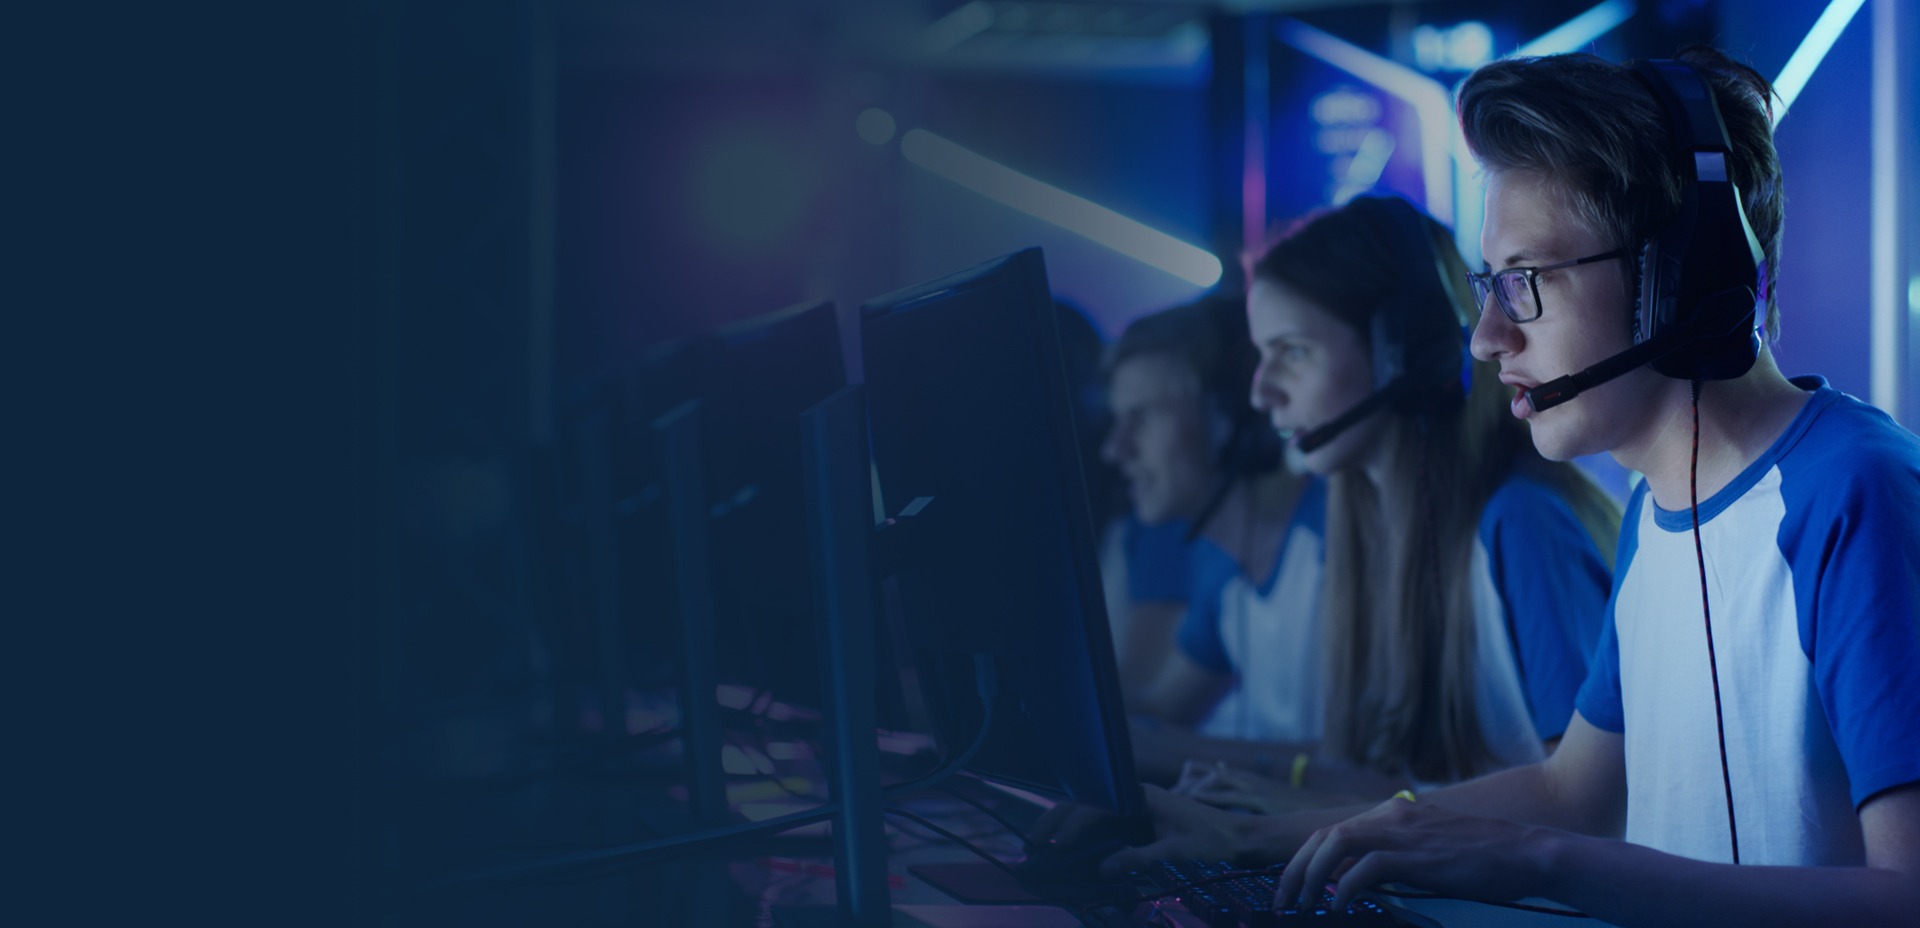 Cyber Security Threats in Gaming Industry at an All-time High